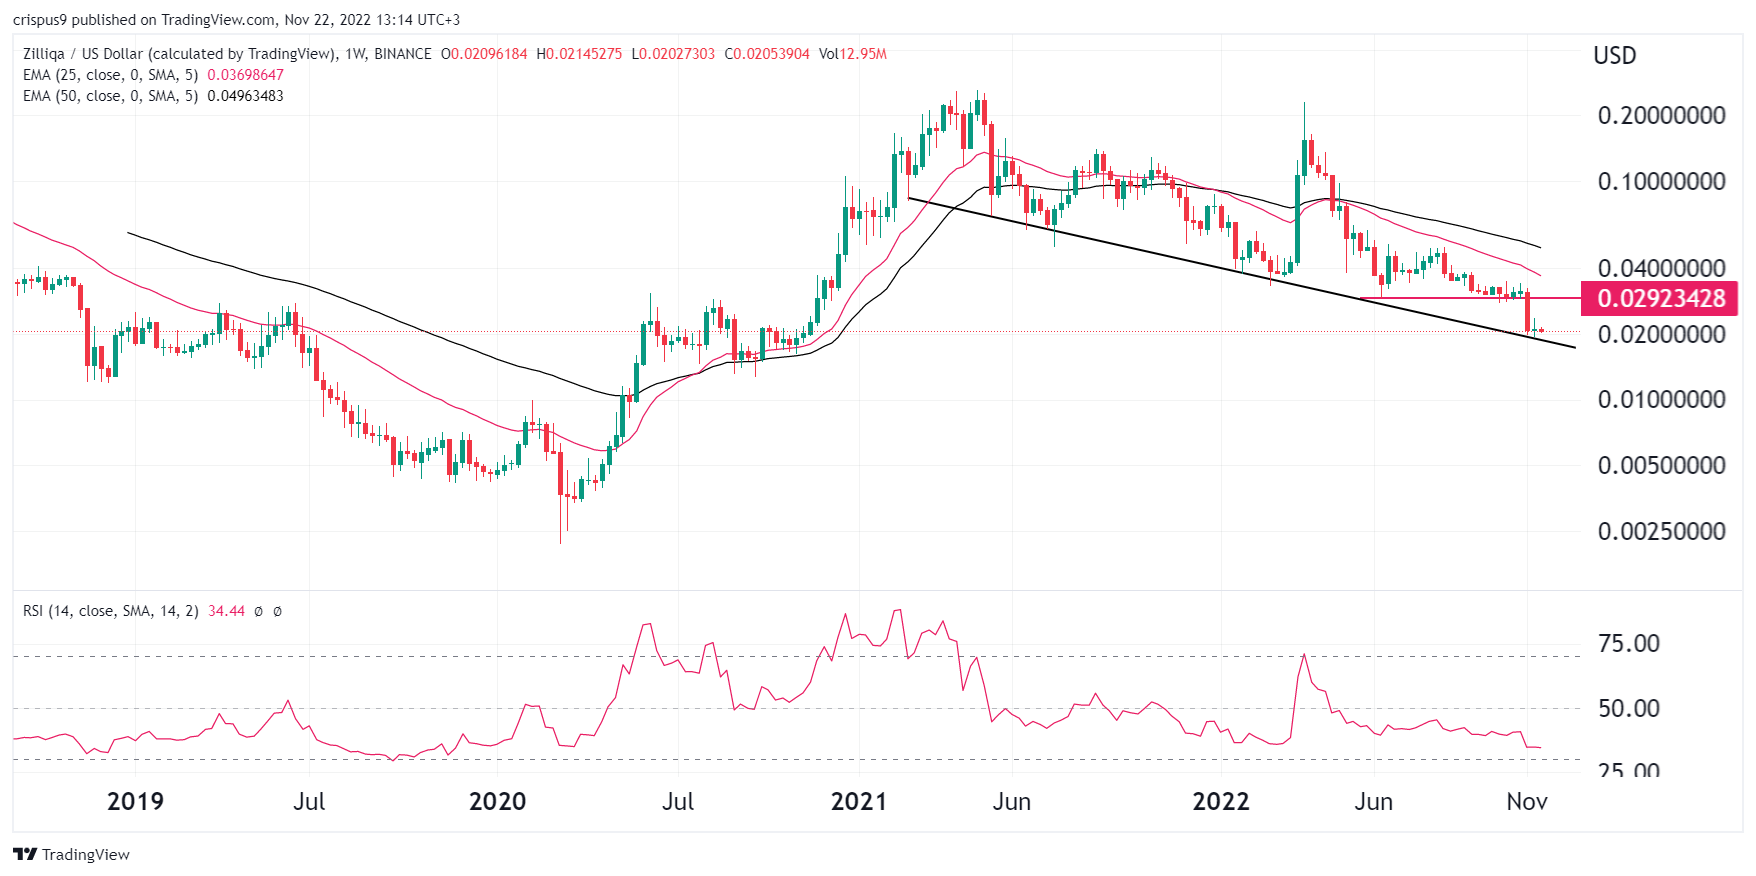 Zilliqa price prediction: what’s next after ZIL falls 90%?